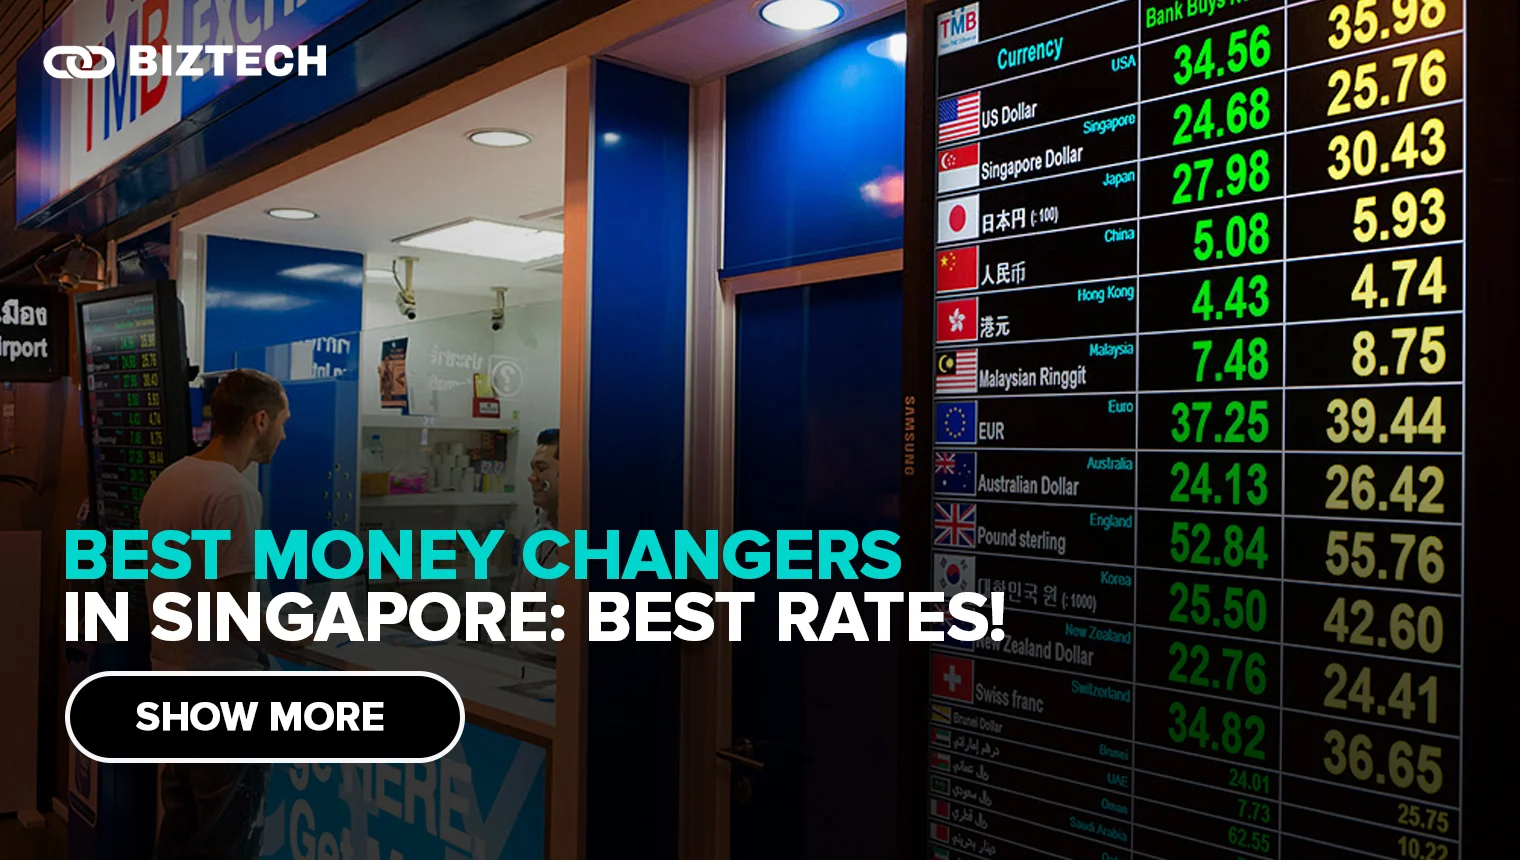 5 Best Money Changers to Get the Best Rates in Singapore